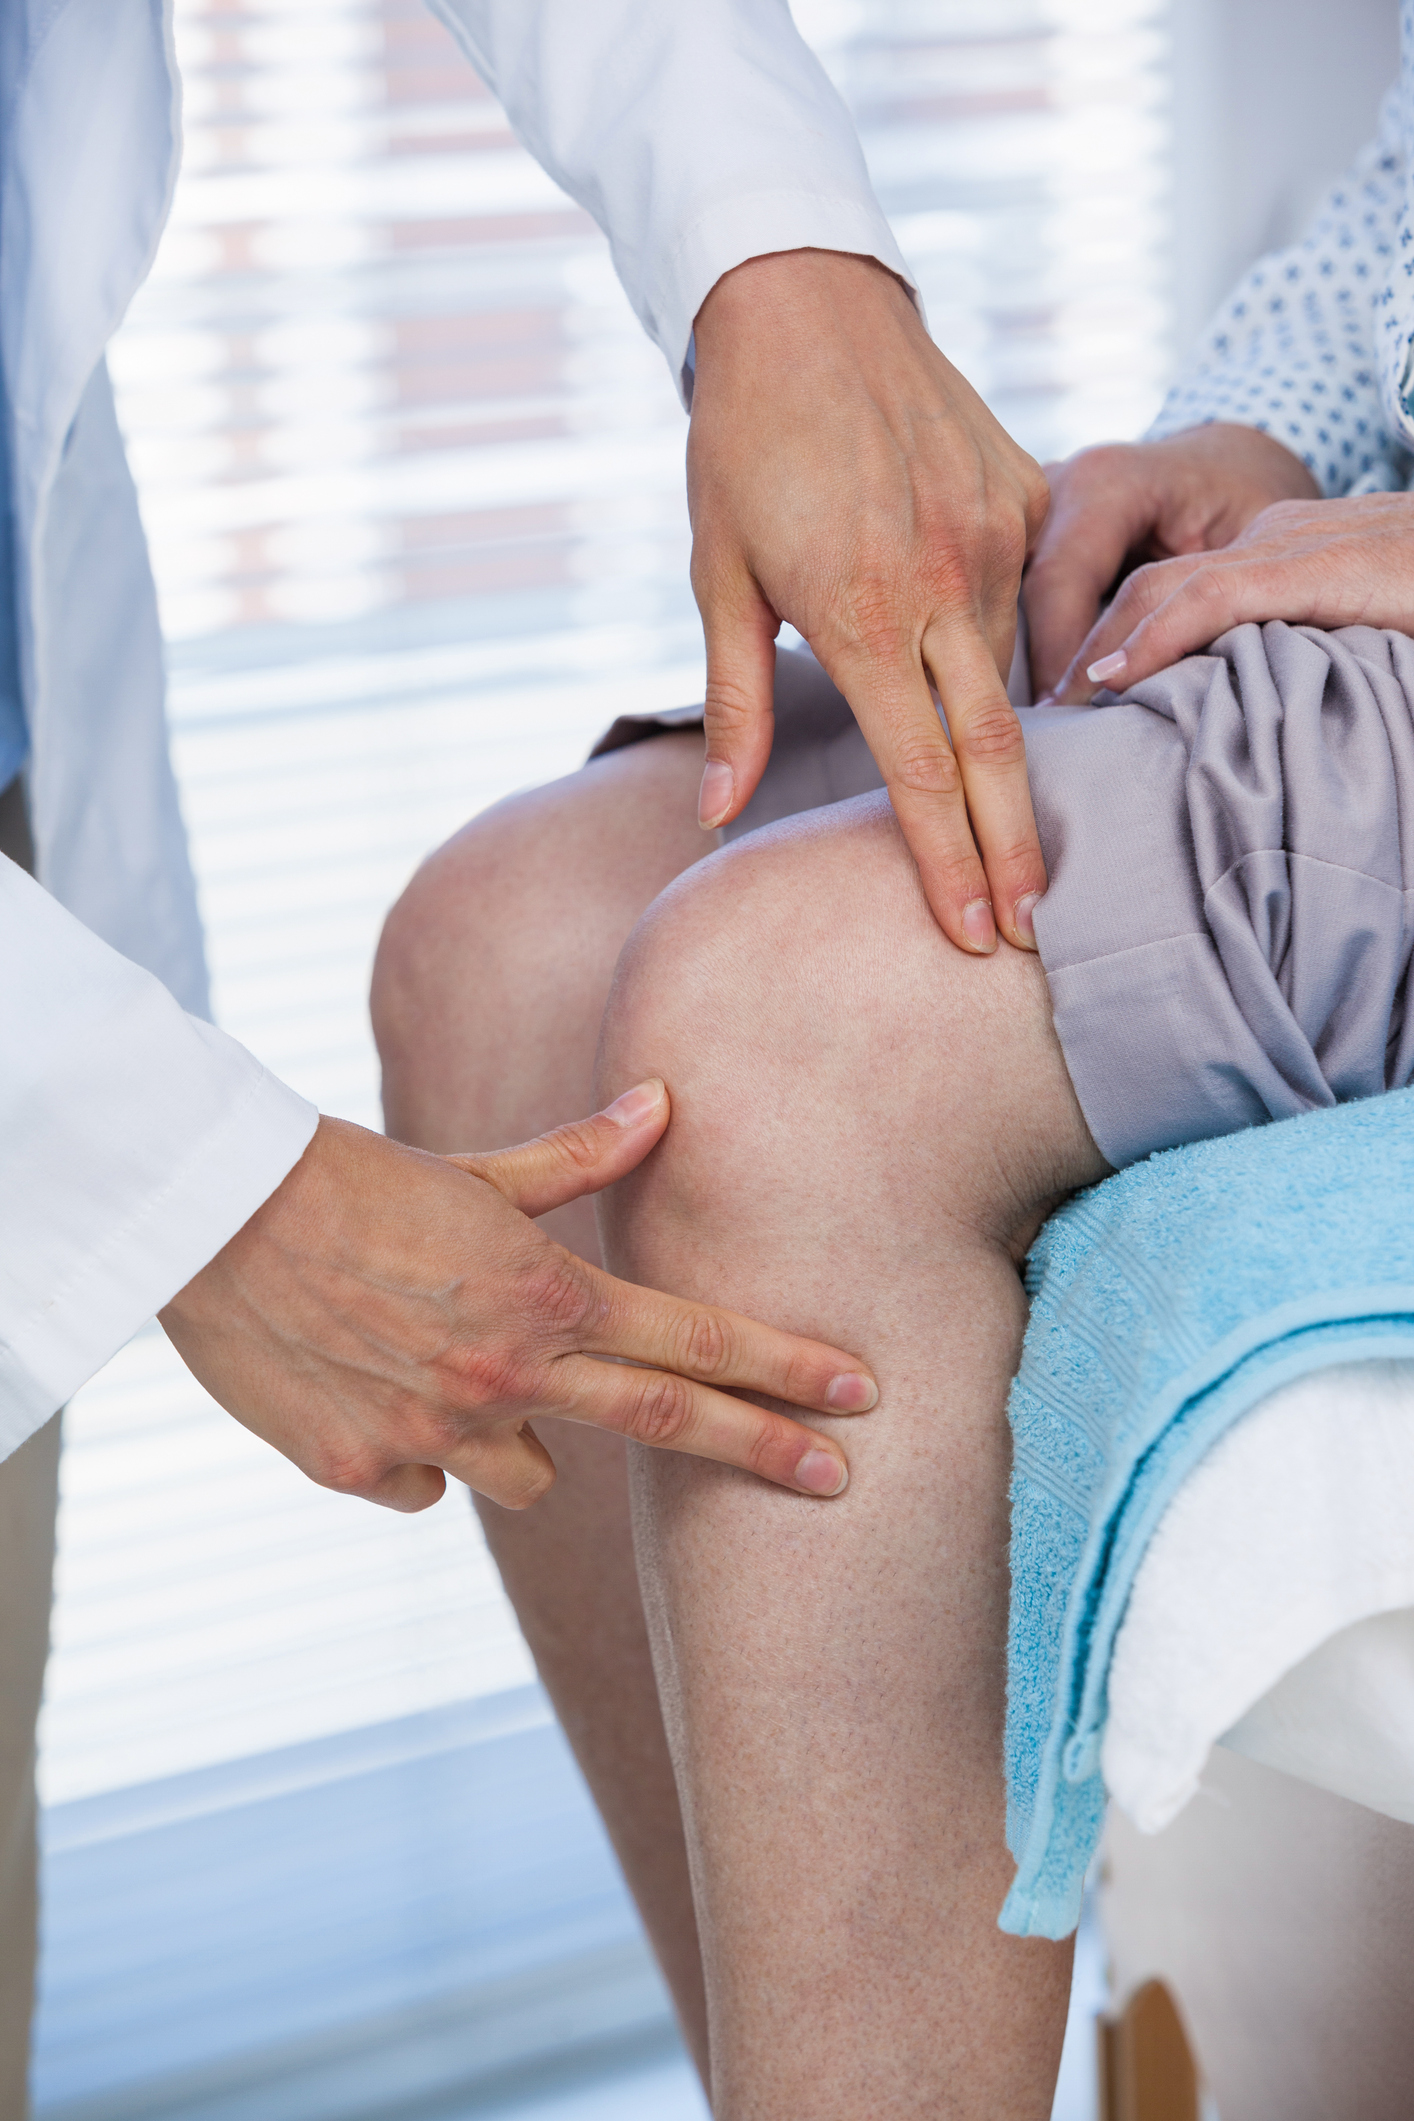 When Should You See a Doctor About Knee Pain?